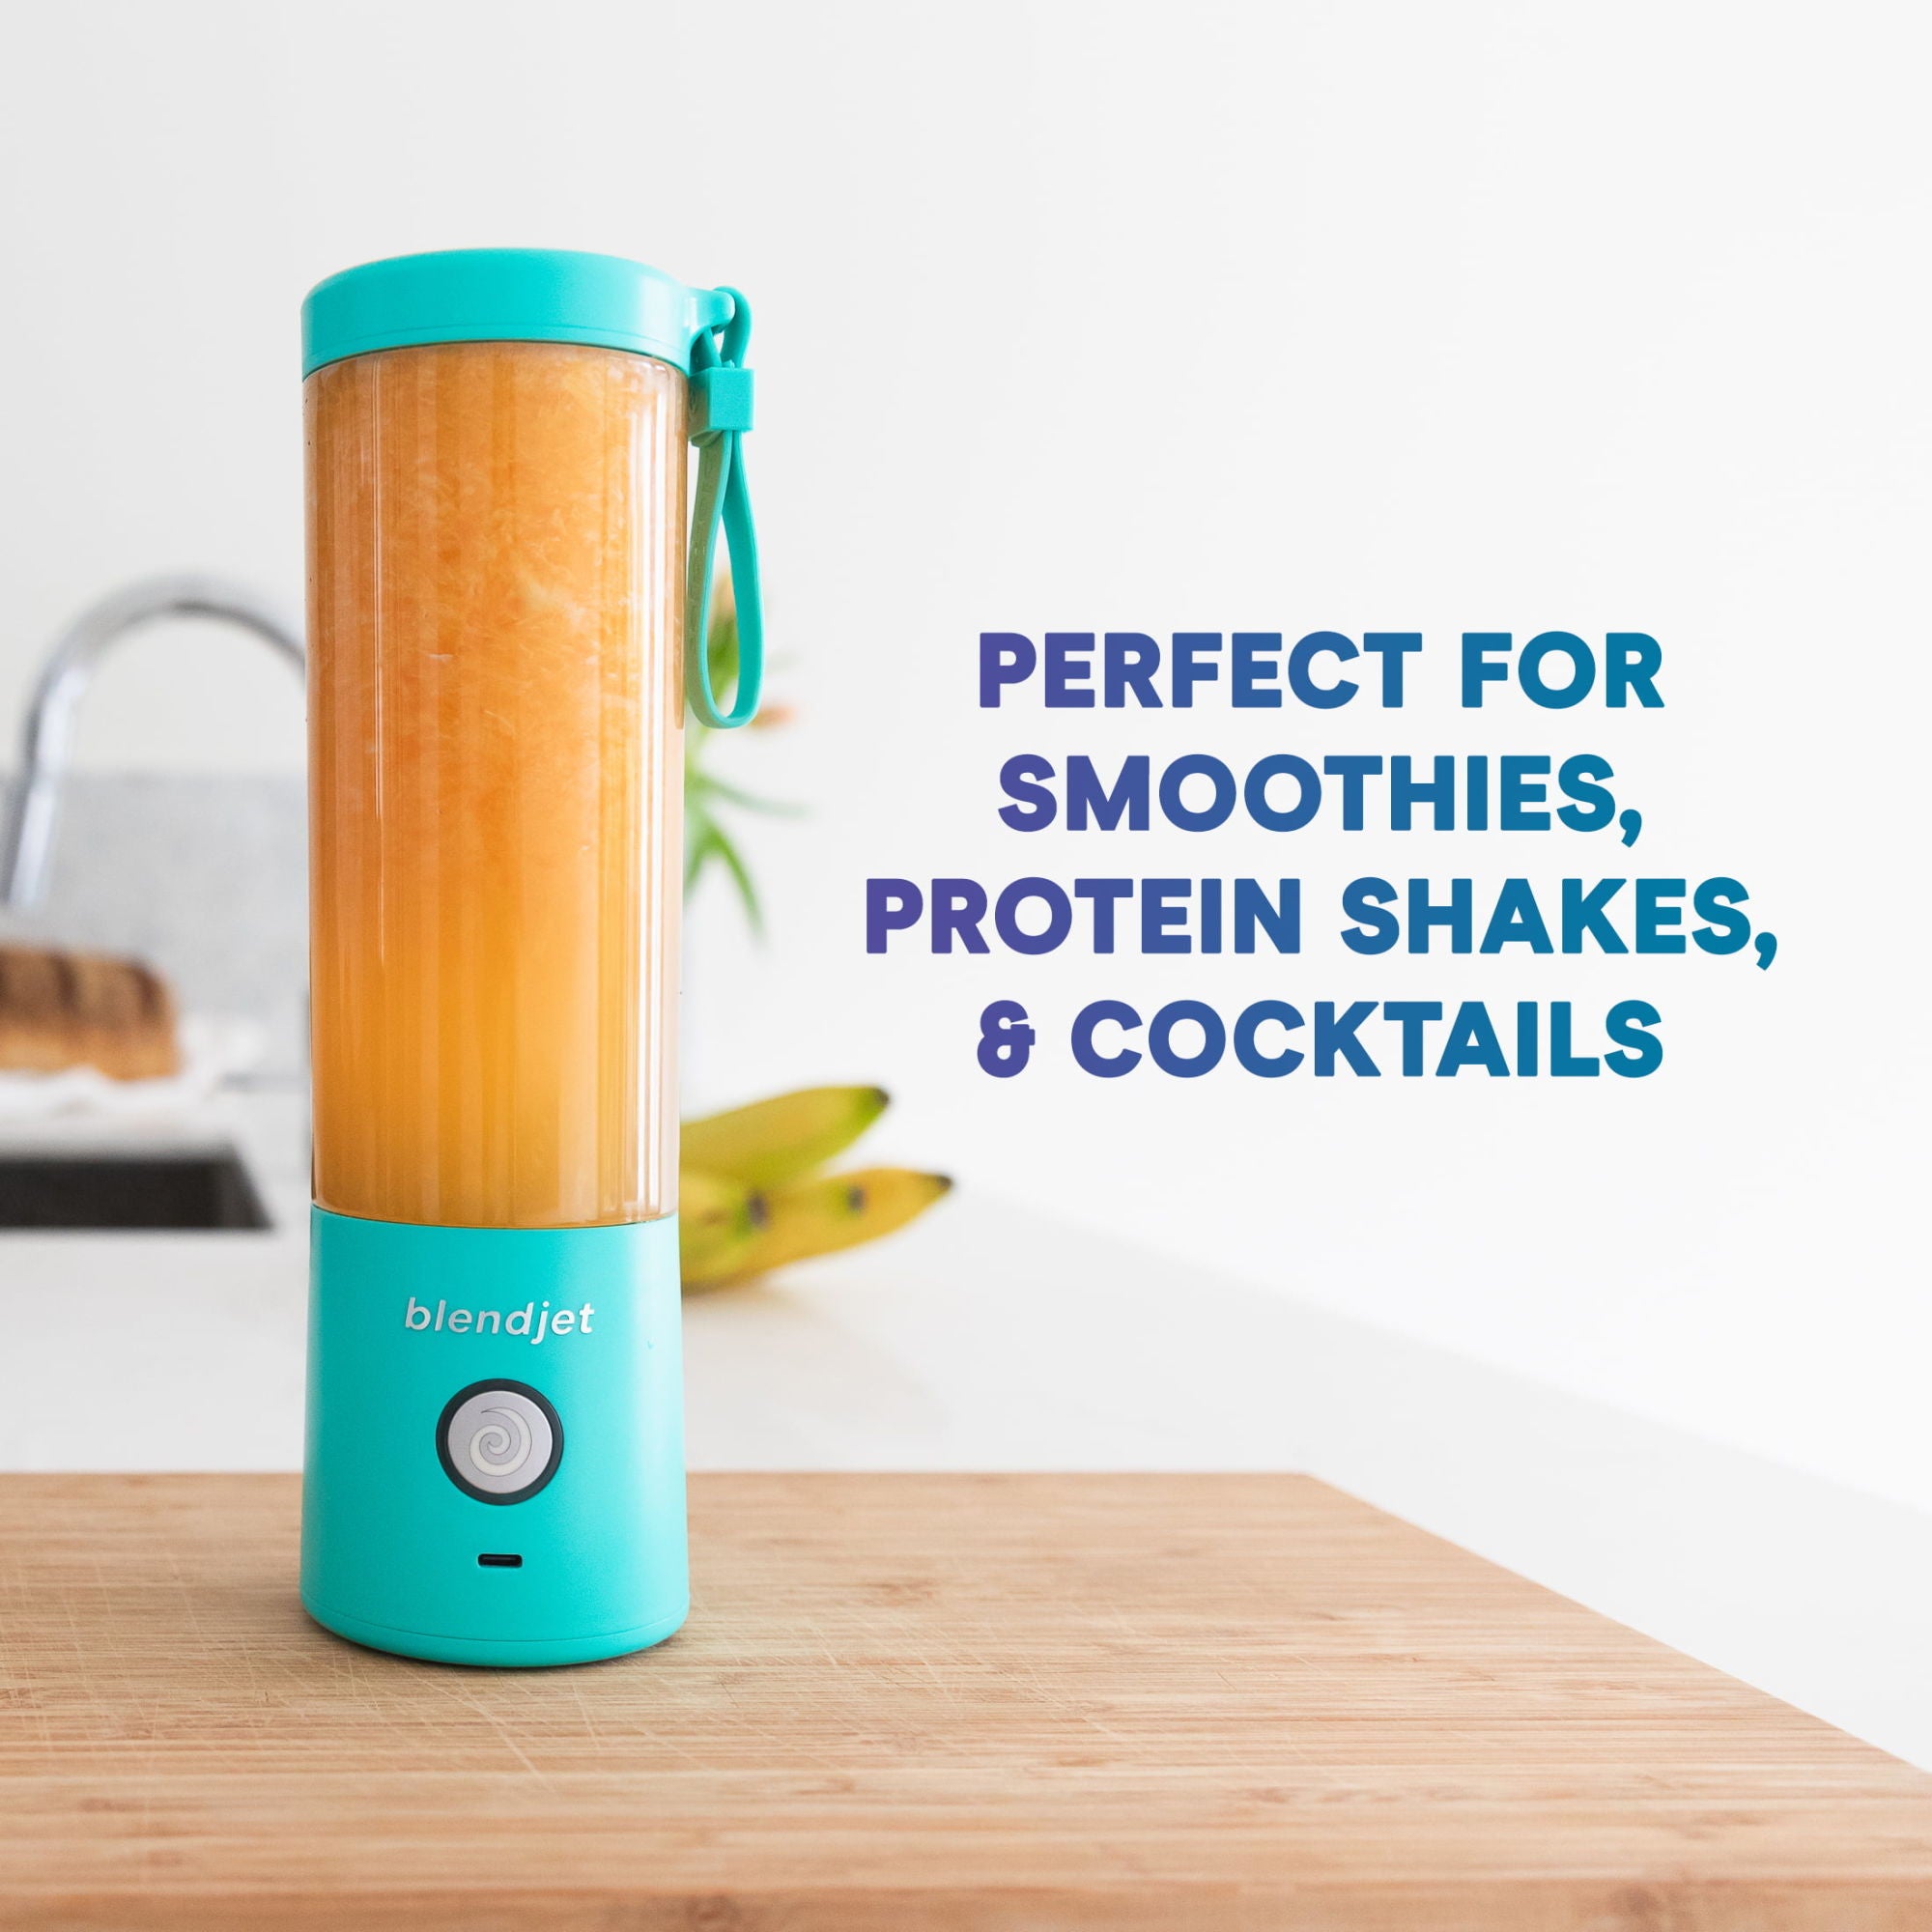 The Original Portable Blender, 16 oz with a leopard print handle, perfect for making smoothies on the go.